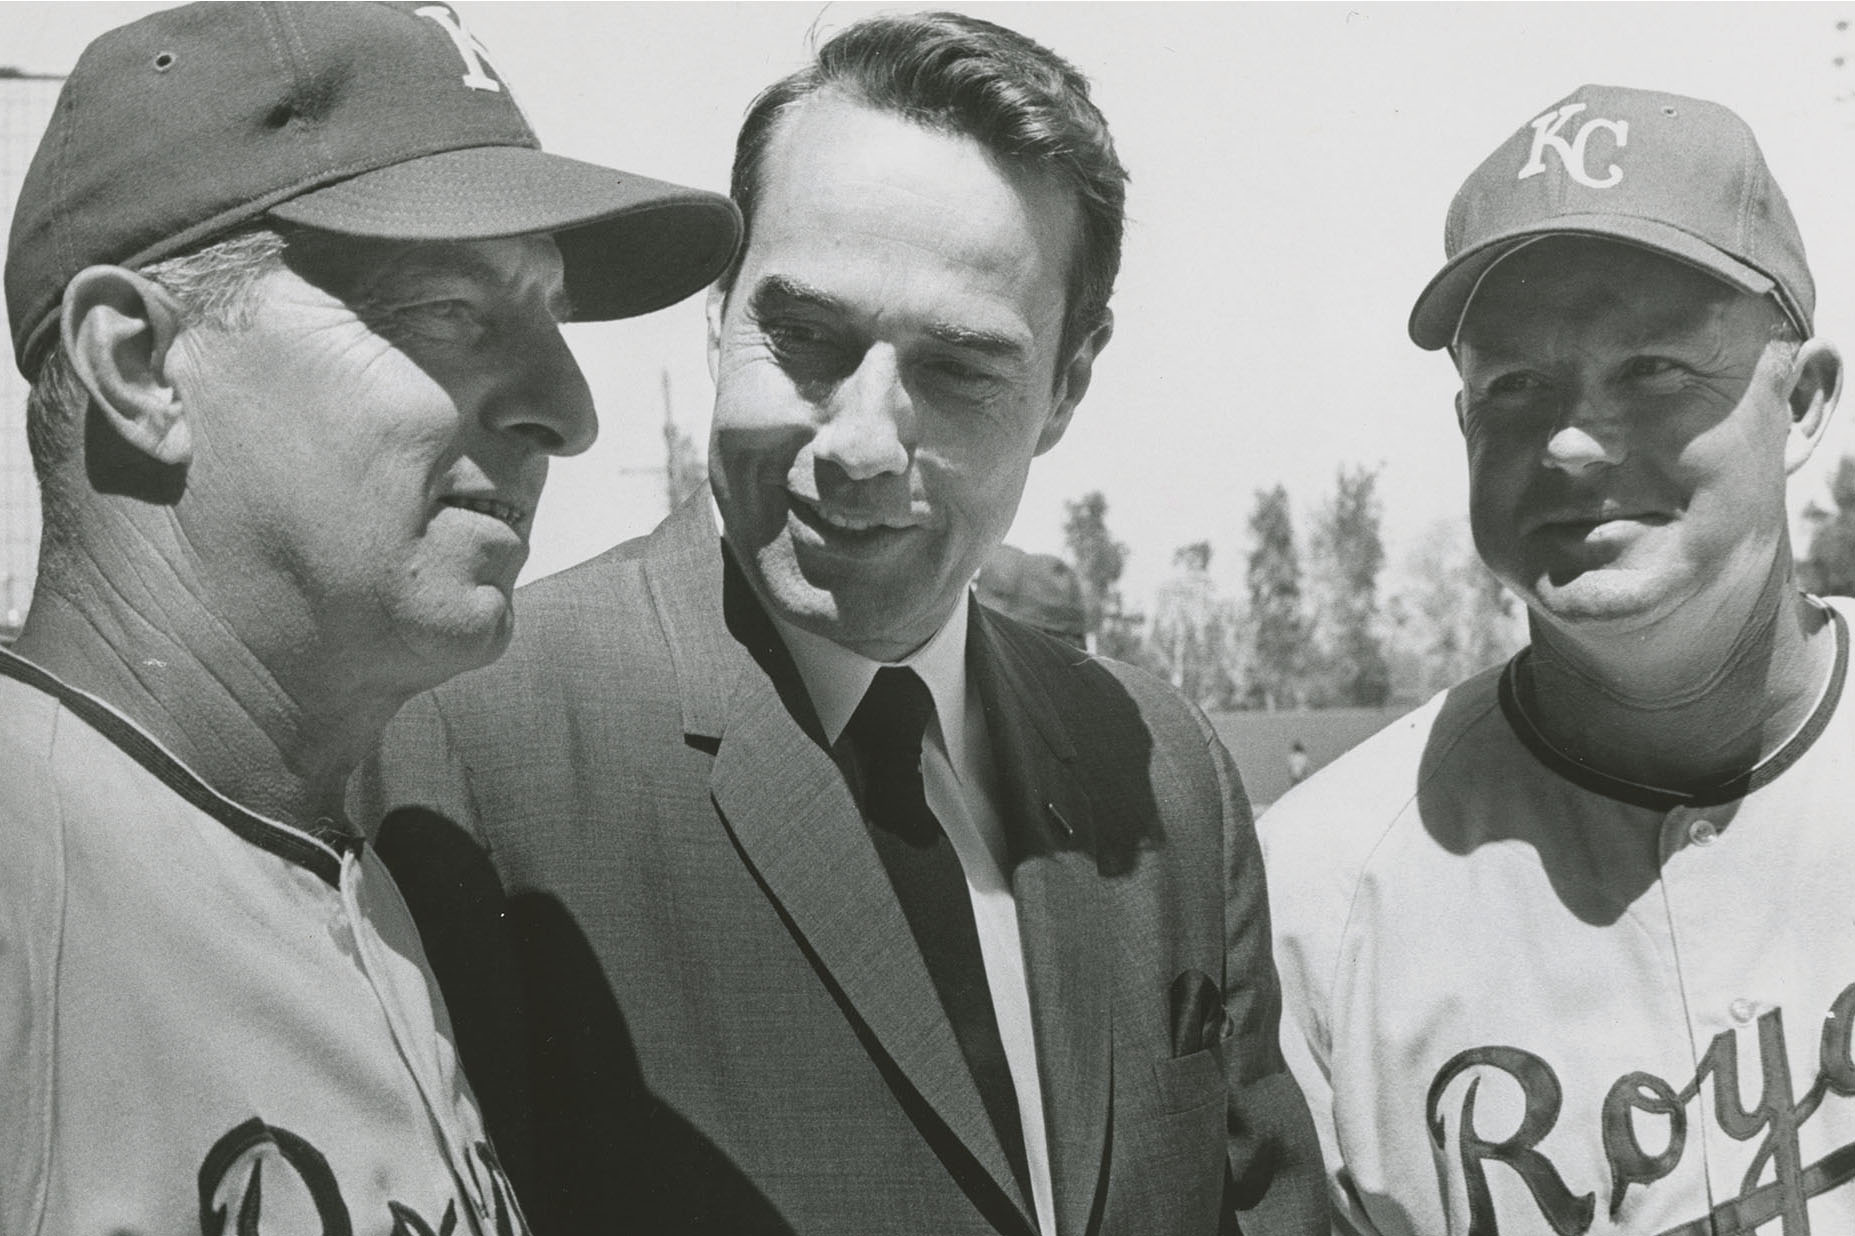 Dole with Royals players